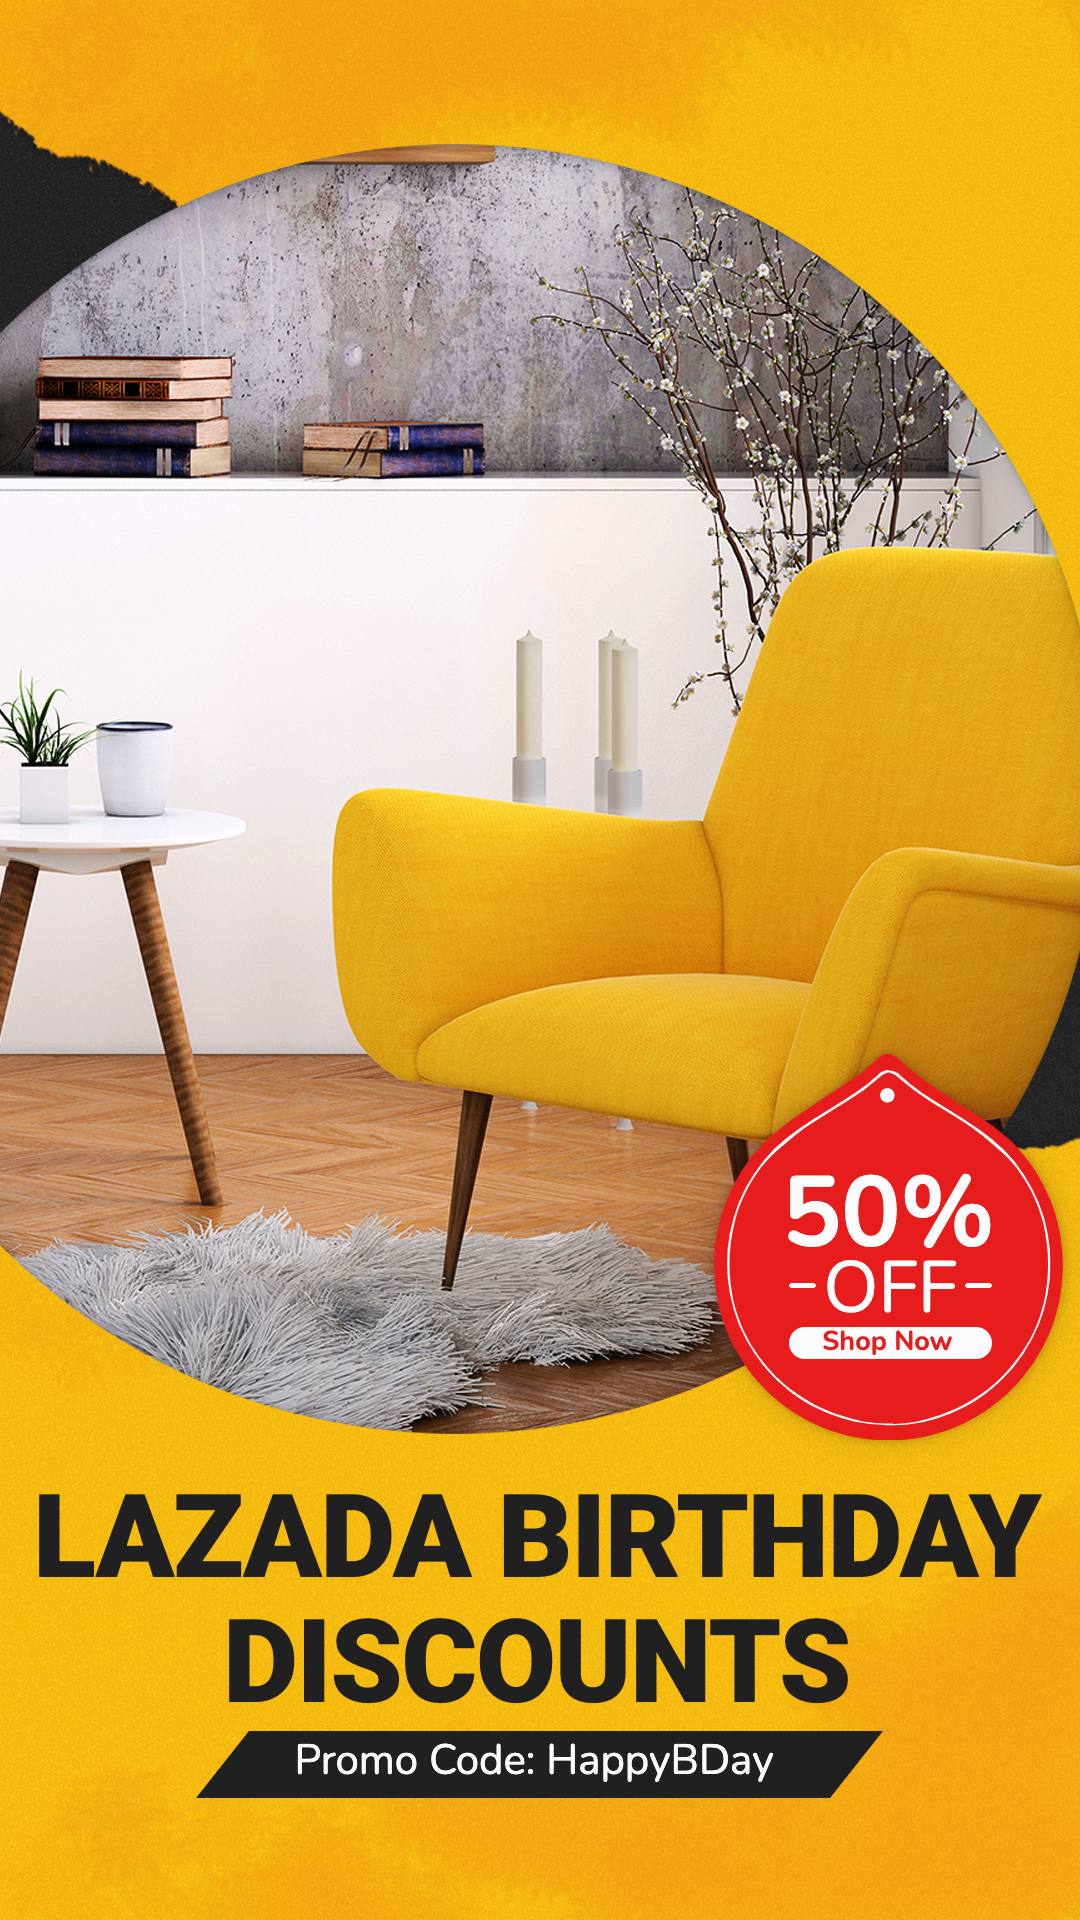 Furniture Store Lazada Birthday Sale Eommerce Story预览效果